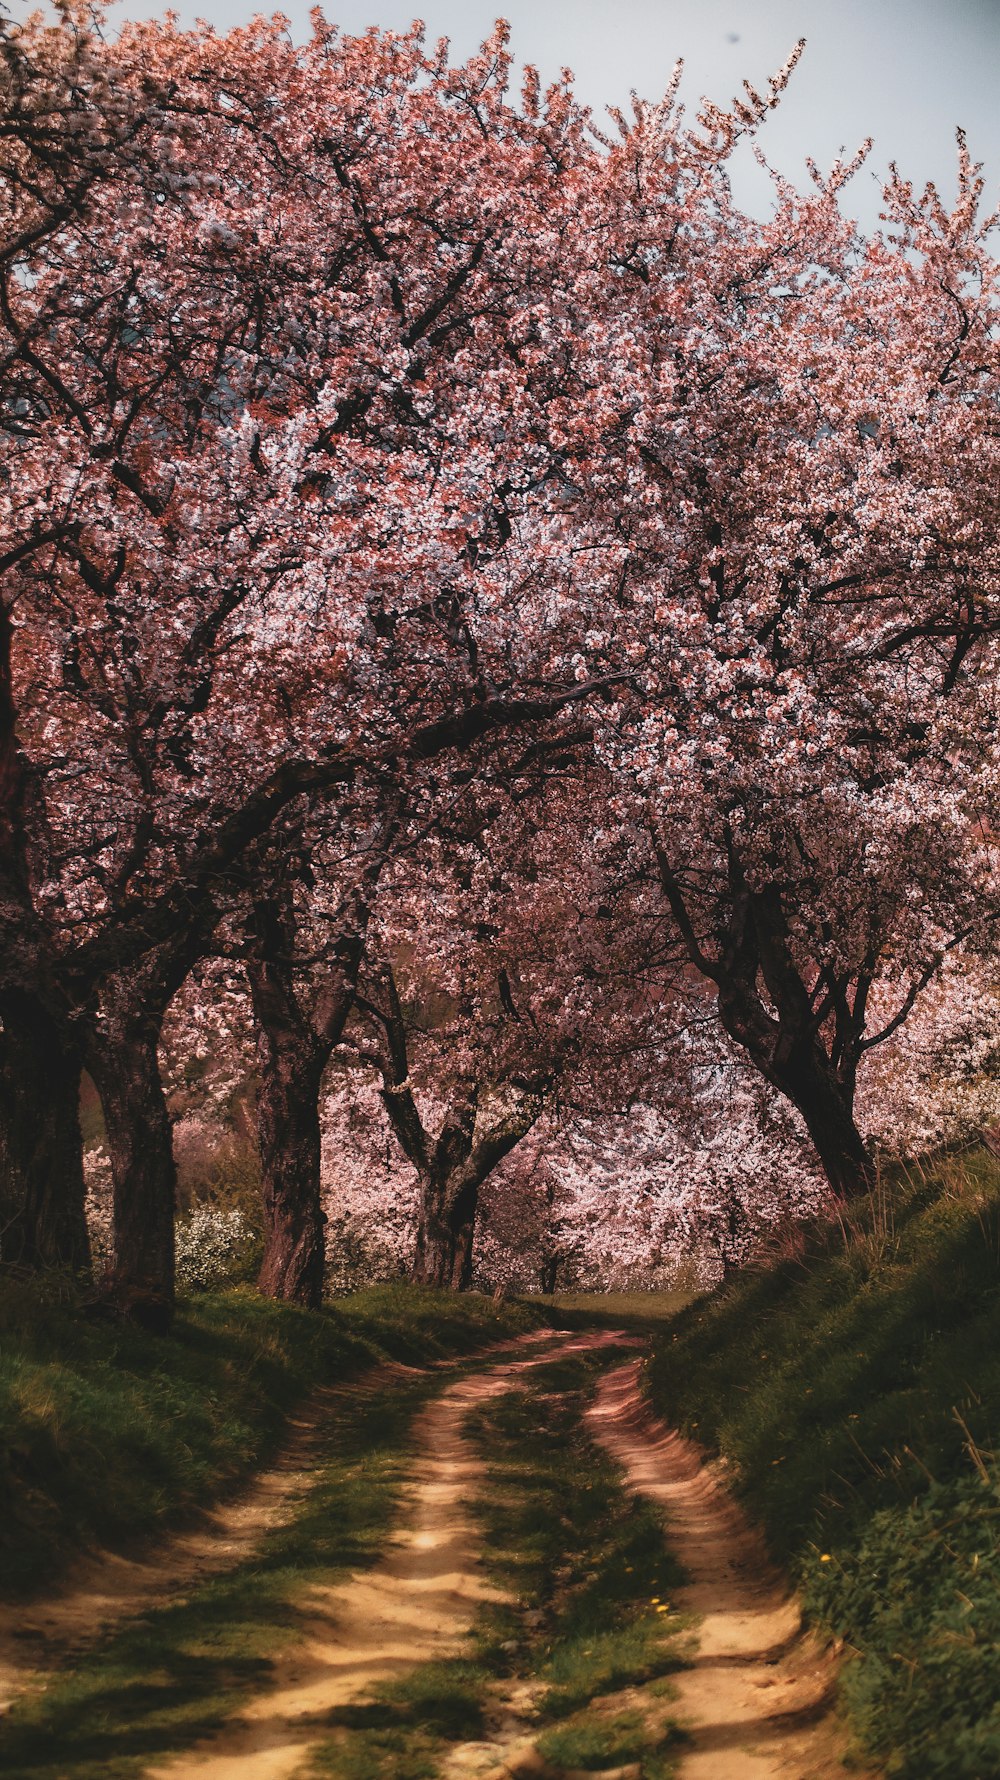 a dirt road surrounded by trees with pink flowers